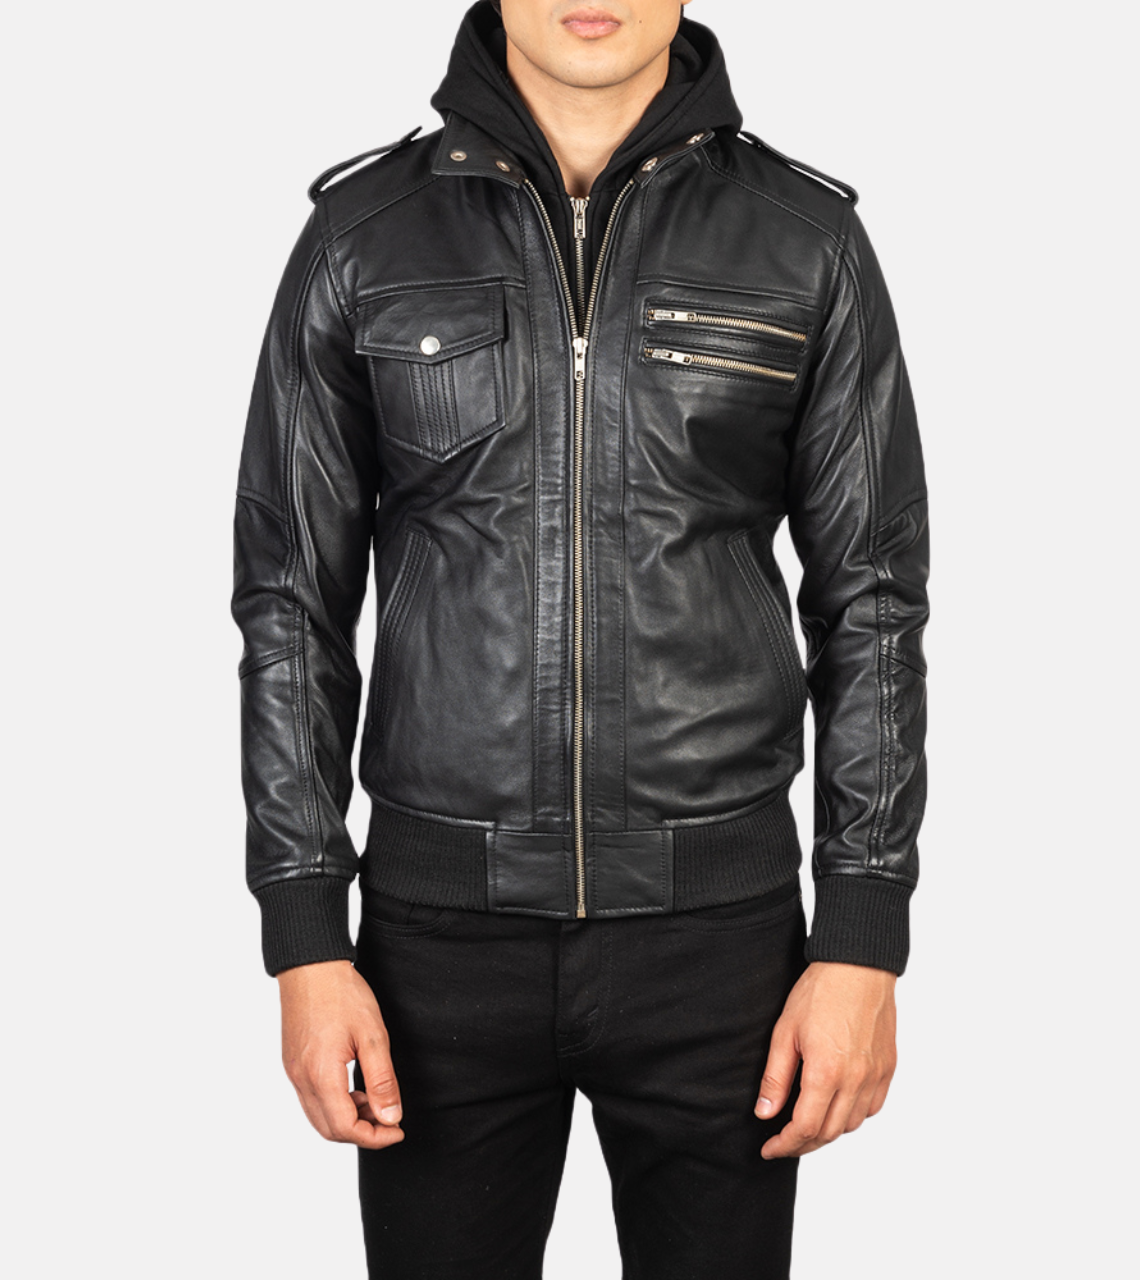 Mitico Hooded Men's Leather Bomber Jacket